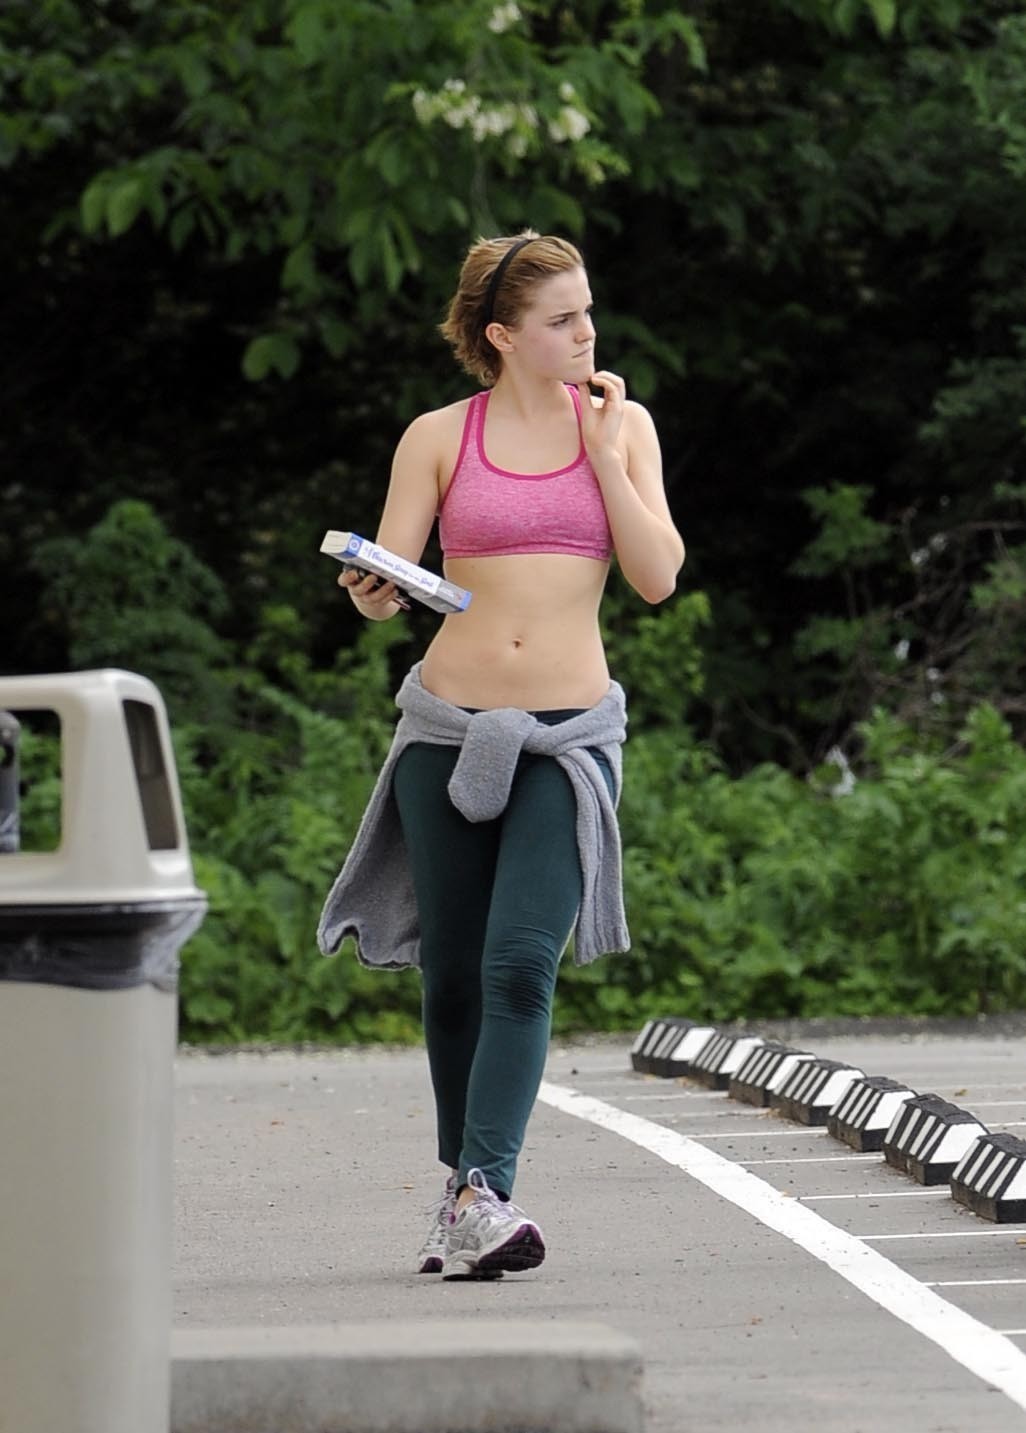 Emma Watson shows off her belly wearing sexy sports outfit in Pittsburgh #75302612